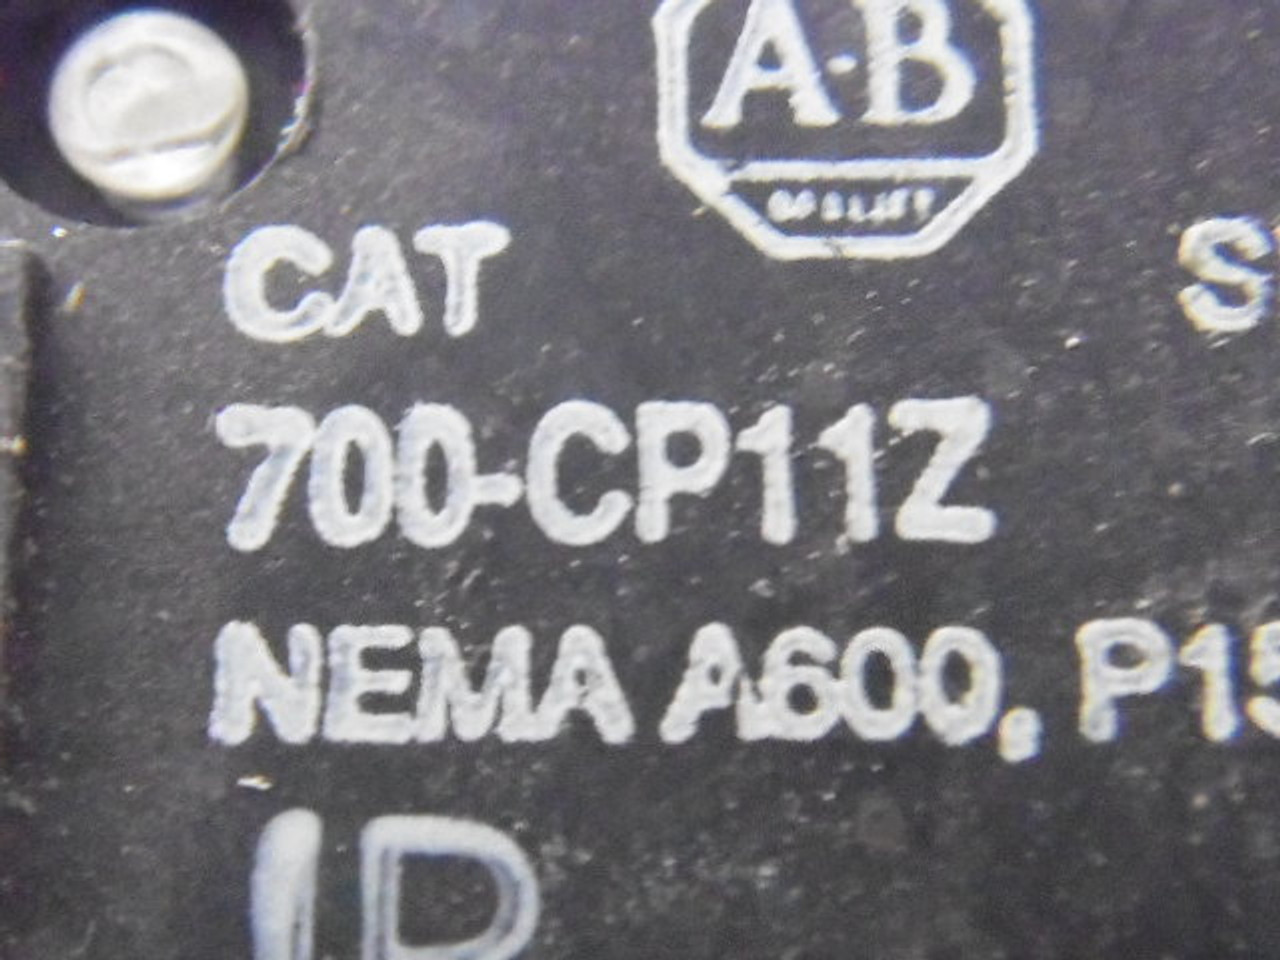 Allen-Bradley 700-CP11Z Overlay Contact USED